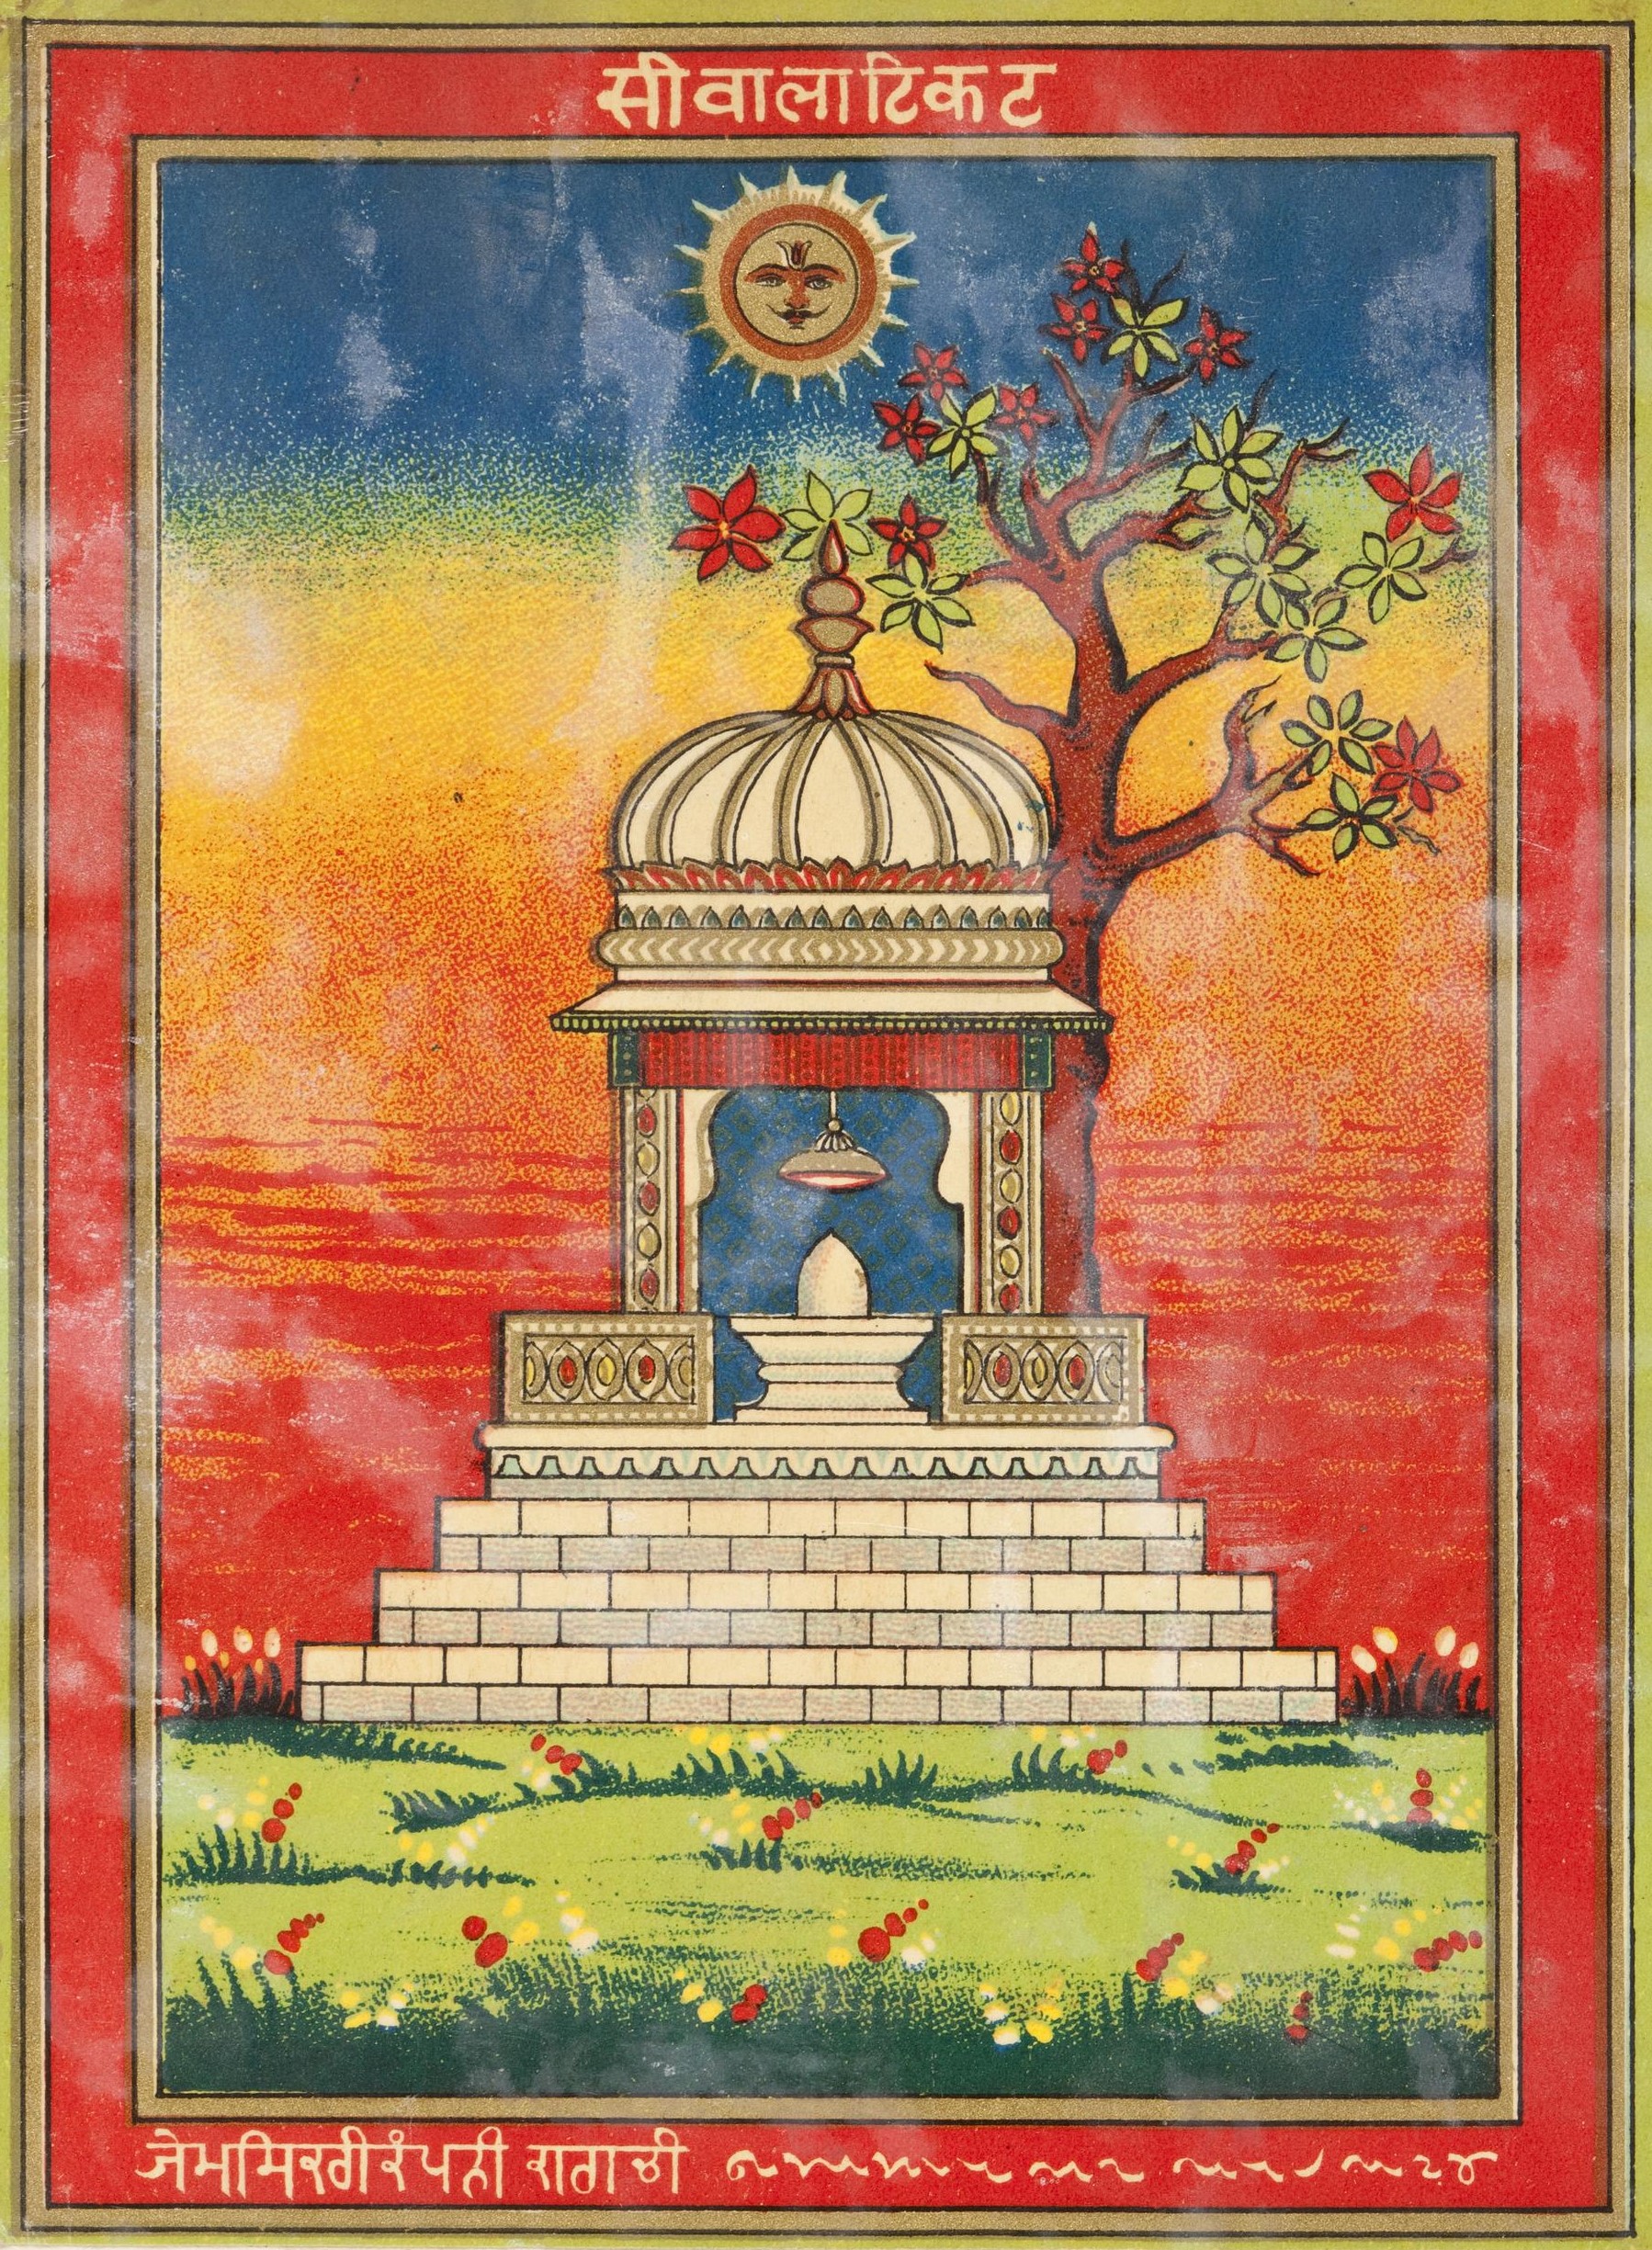 A shipper's ticket from the collection at the Museum of Science and Industry showing an ornate pavillion in a garden against a red and orange sunset